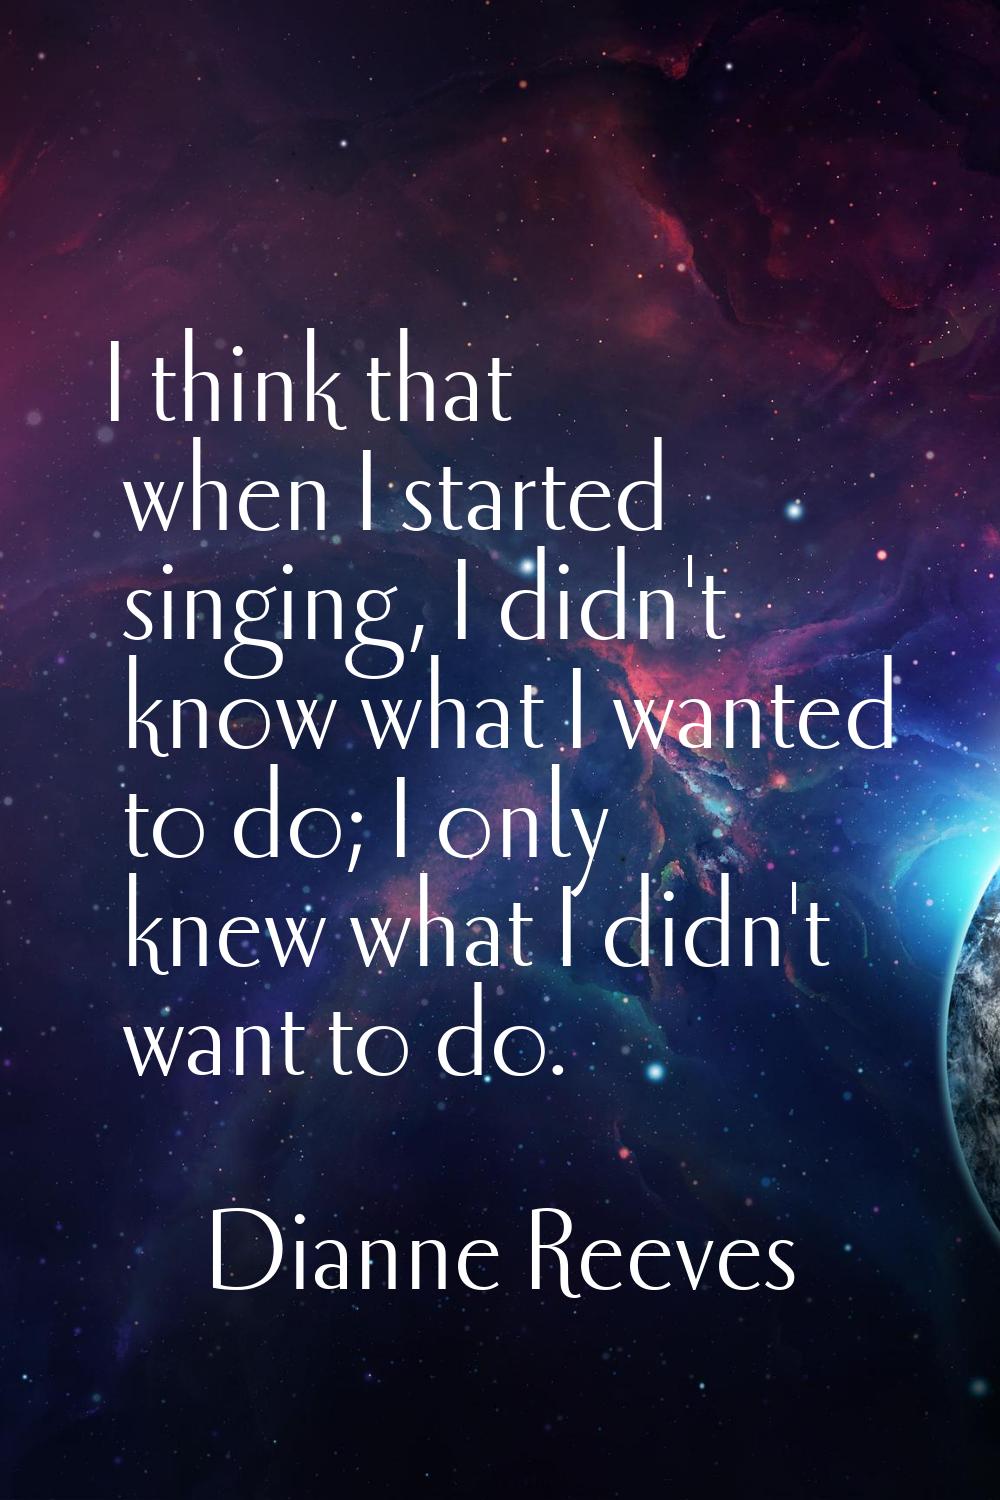 I think that when I started singing, I didn't know what I wanted to do; I only knew what I didn't w